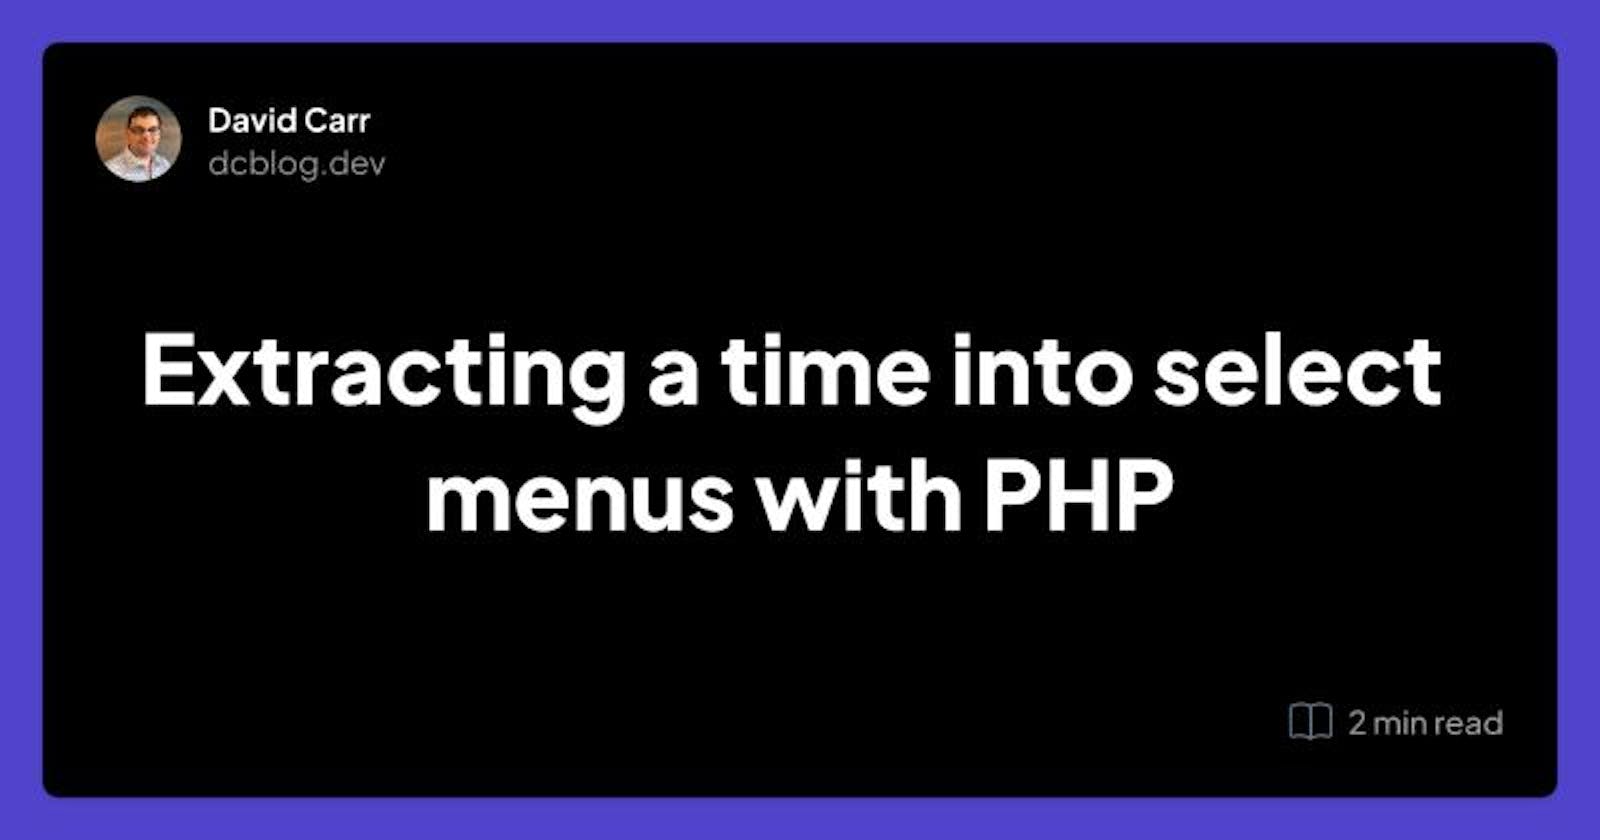 Extracting a time into select menus with PHP